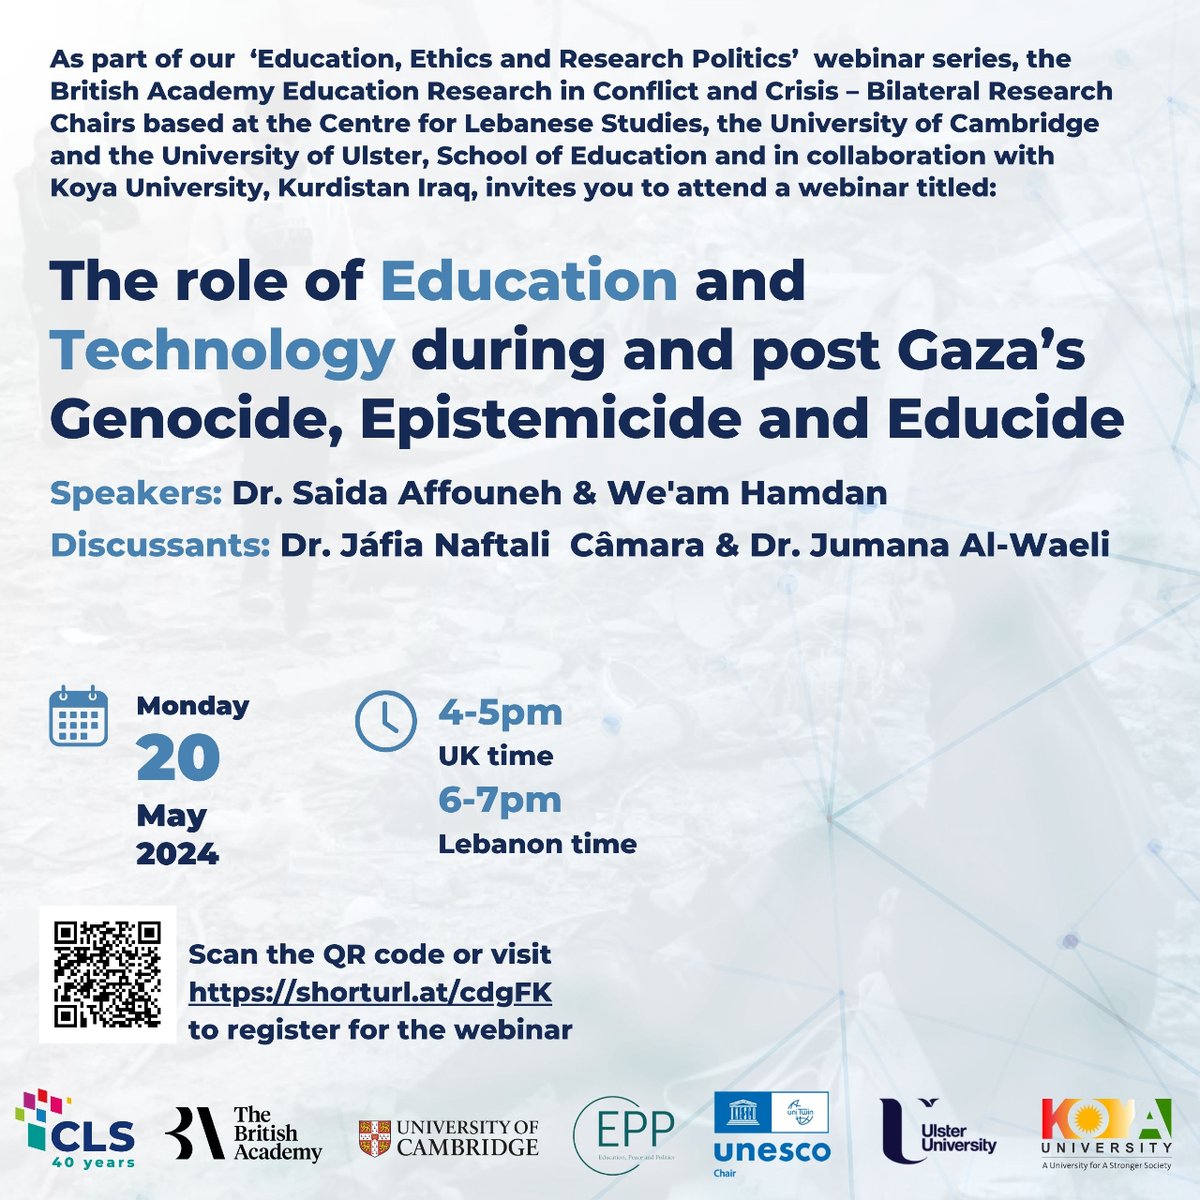 Last chance to register for our Education, Ethics and Research Politics webinar series: The role of Education and Technology during and post Gaza’s Genocide, Epistemicide and Educide 20 May 4-5pm UK / 6-7pm Leb Learn more and register here: lebanesestudies.com/events/the-rol…